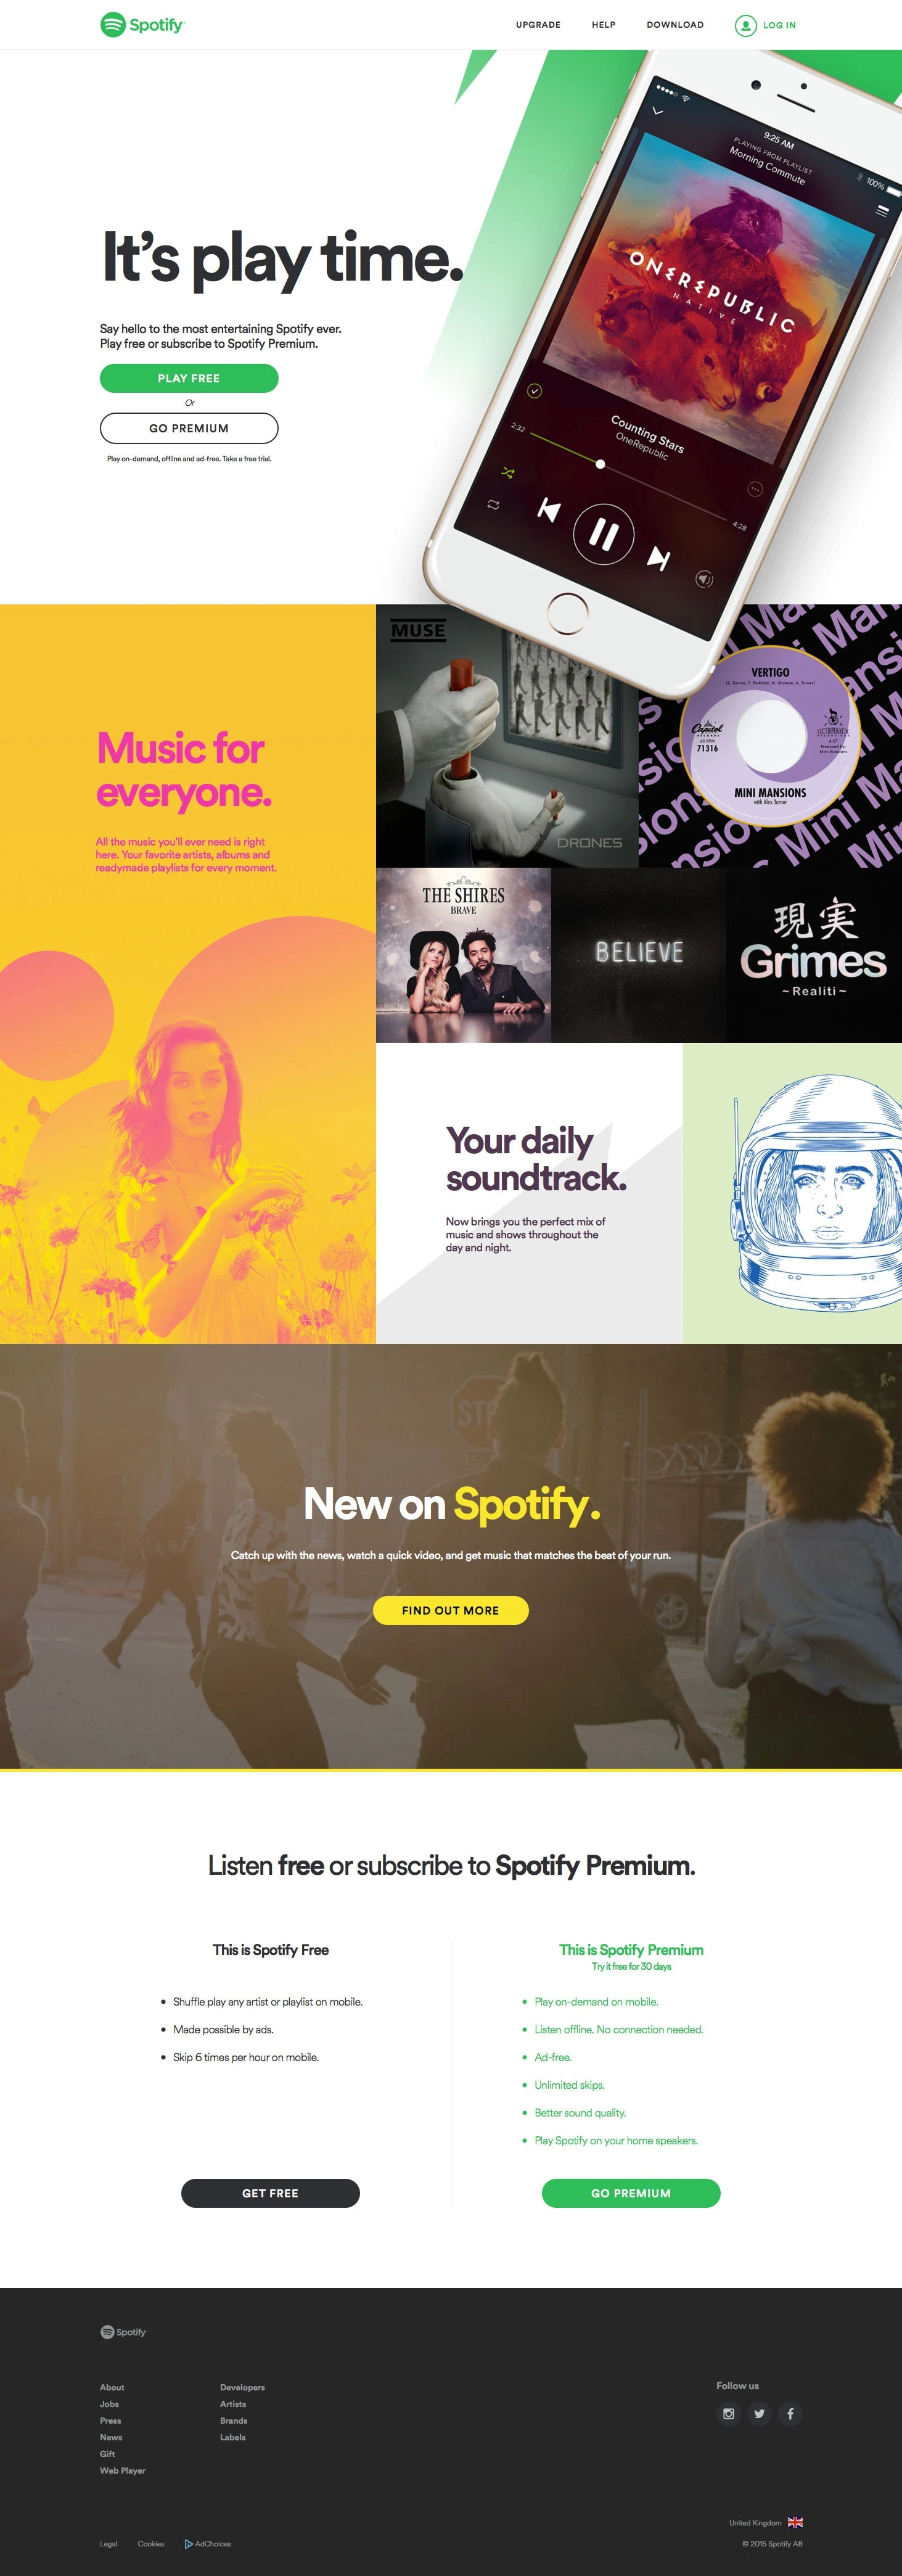 Spotify Landing Page Example: Spotify is a digital music service that gives you access to millions of songs.